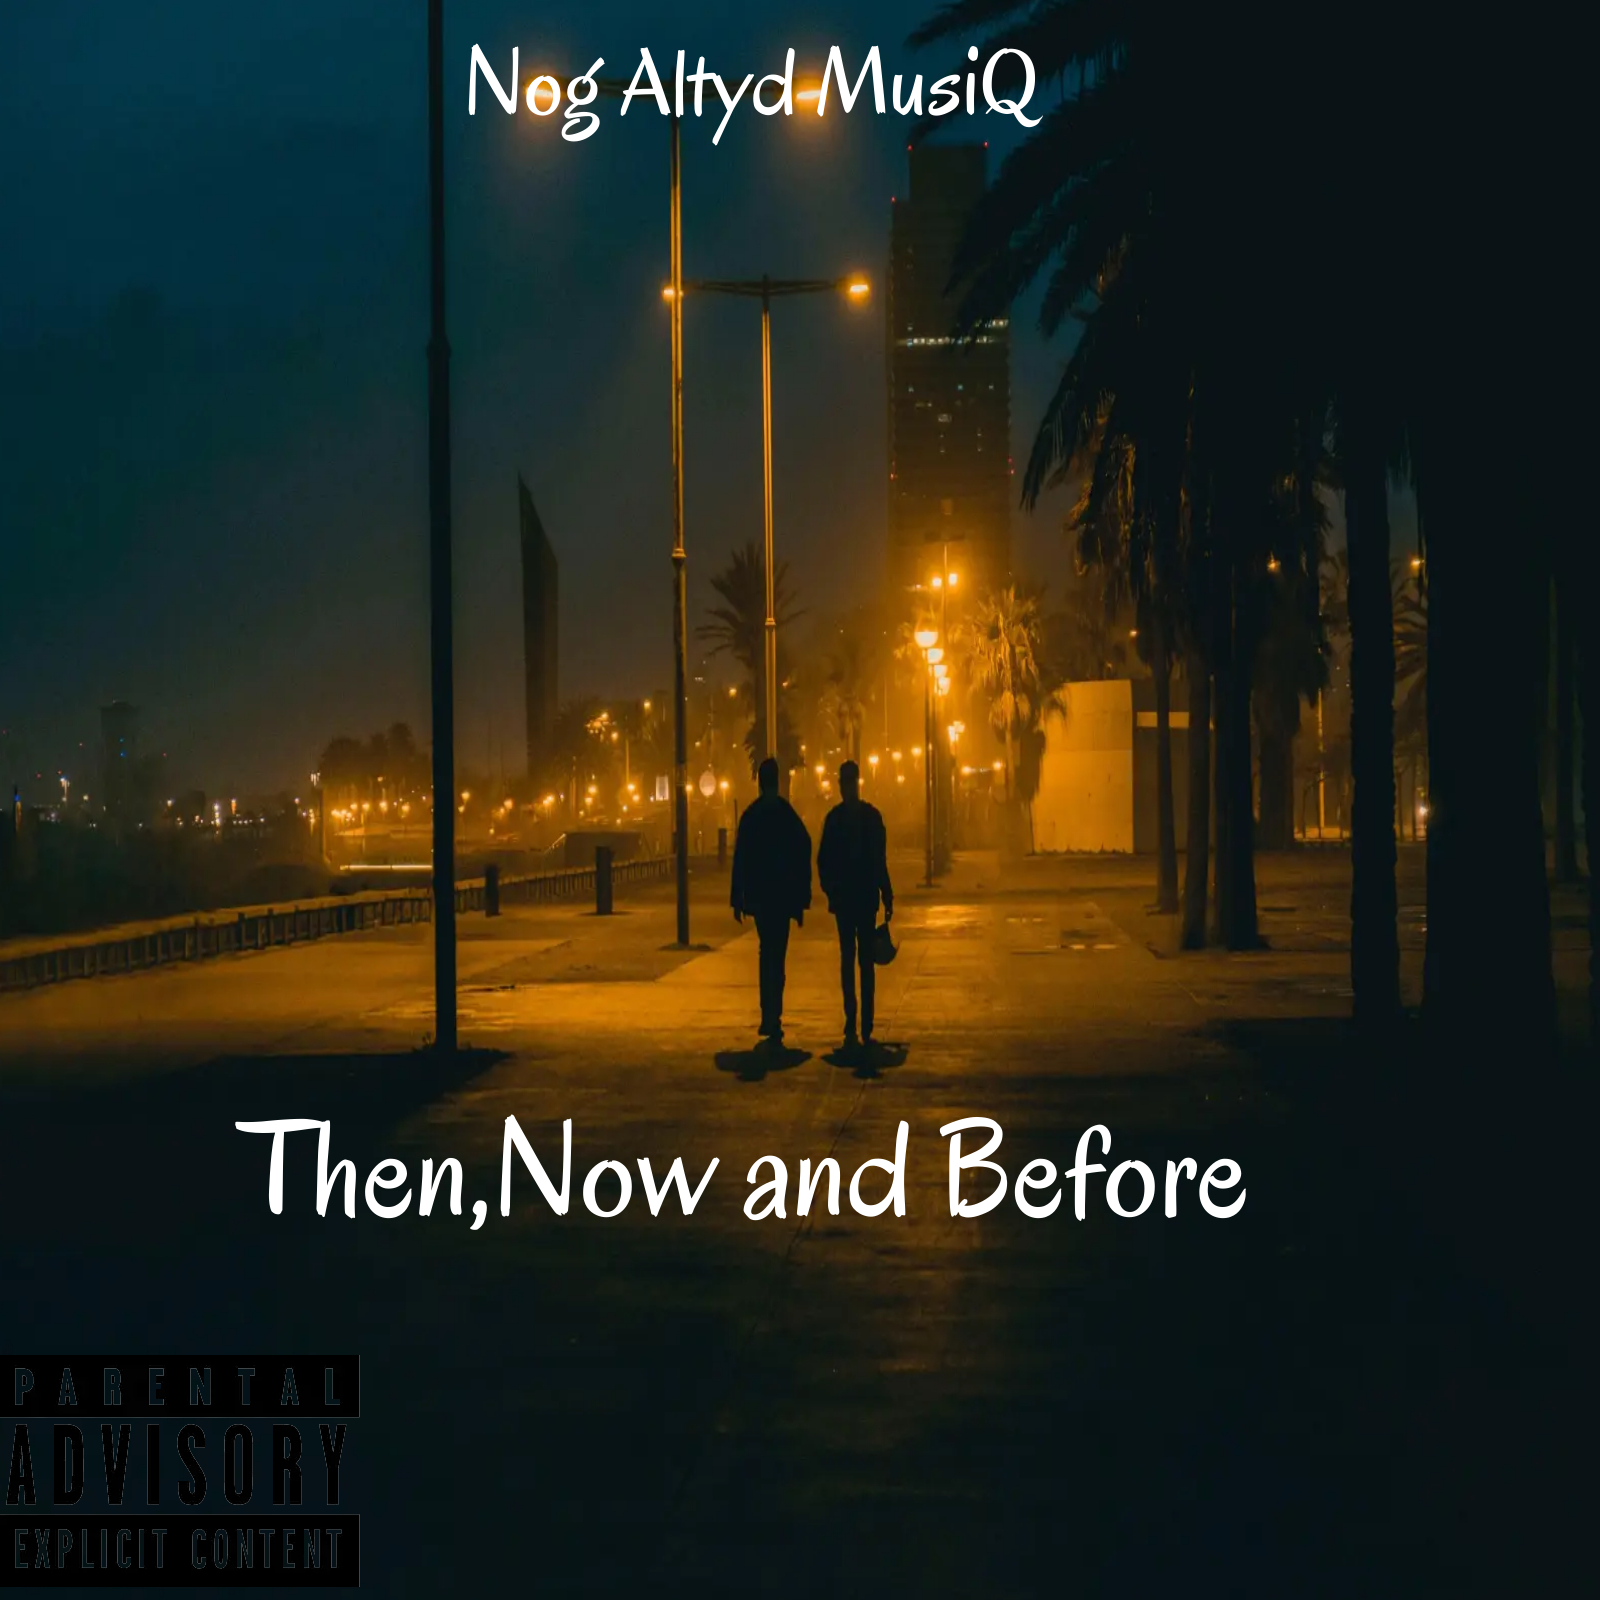 Then Now and Before by Nog Altyd Musiq | Album